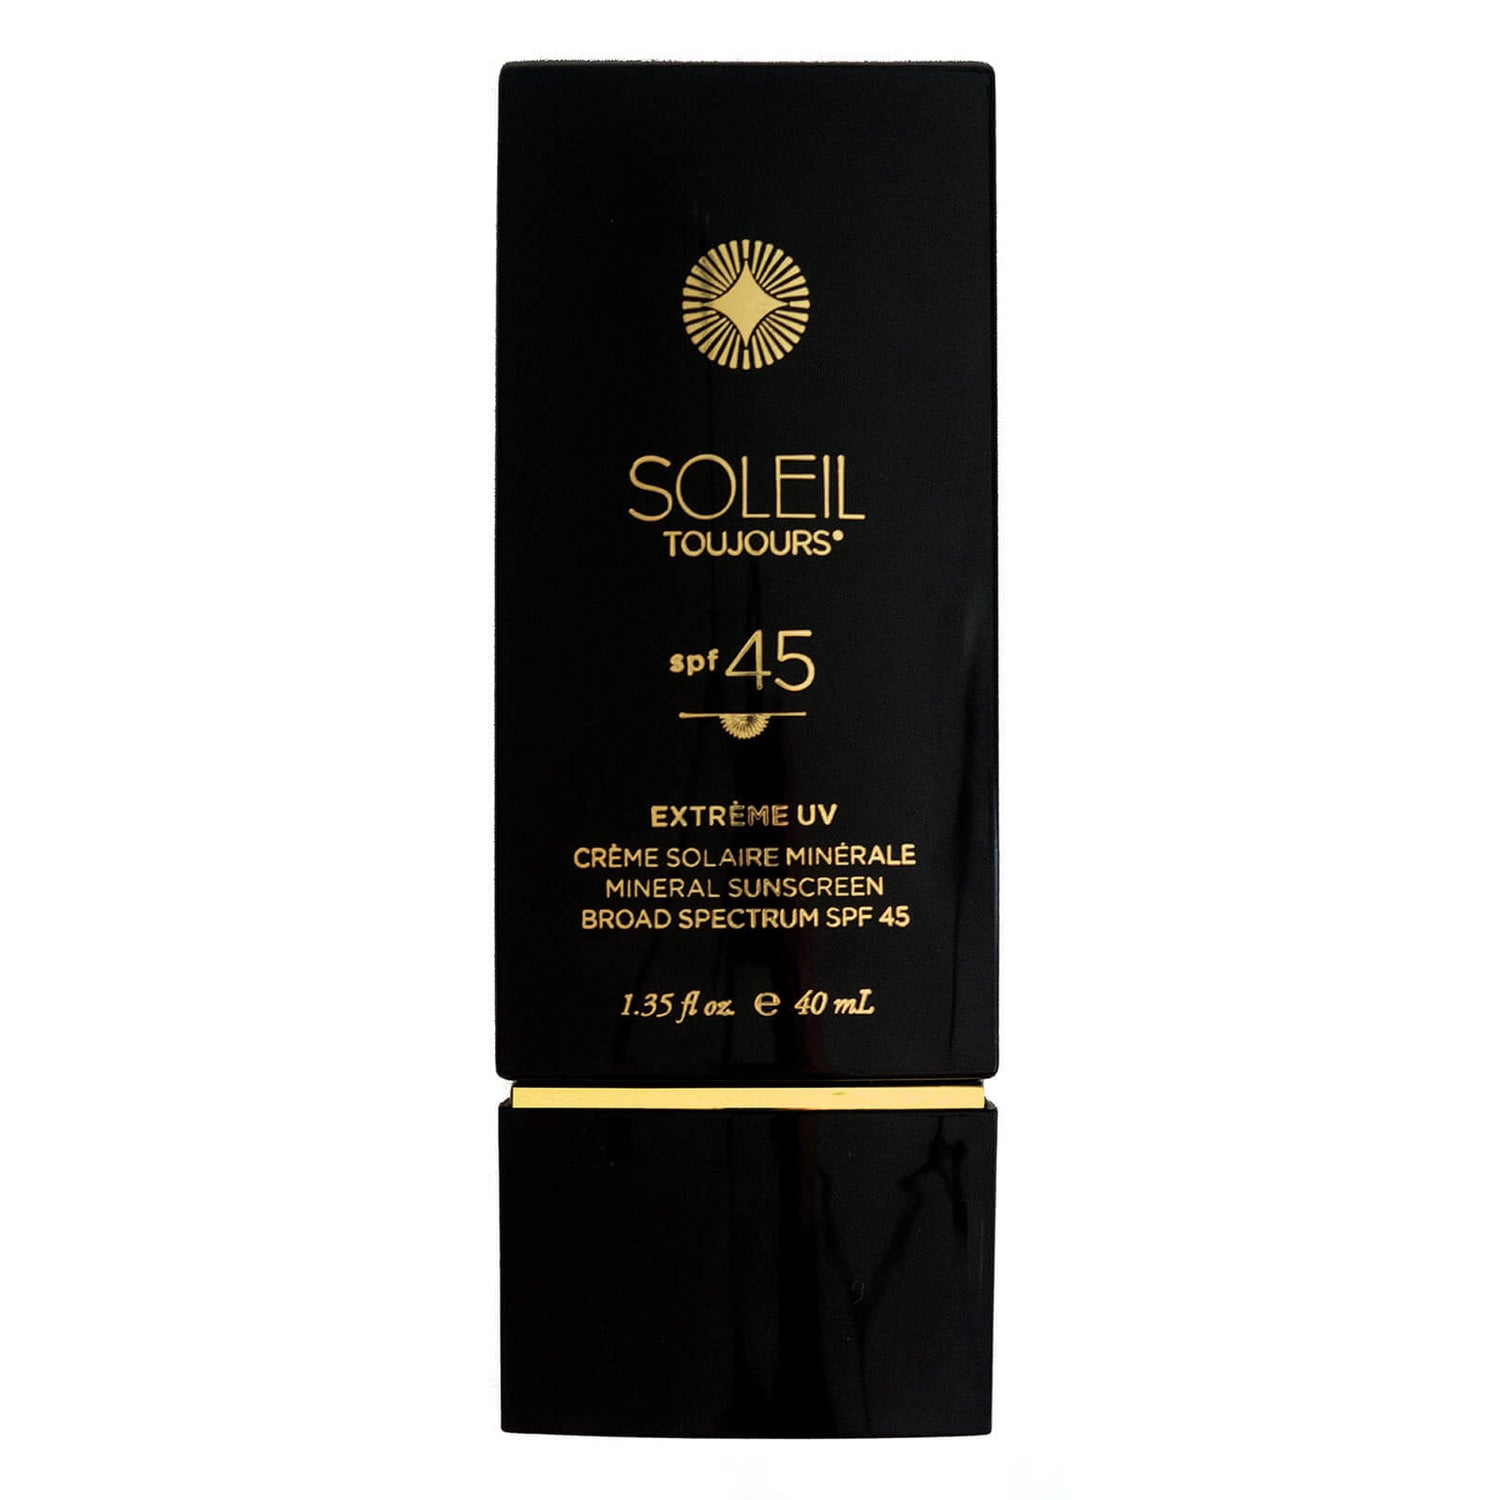 Soleil Toujours Extrème UV Face Mineral Sunscreen SPF 45